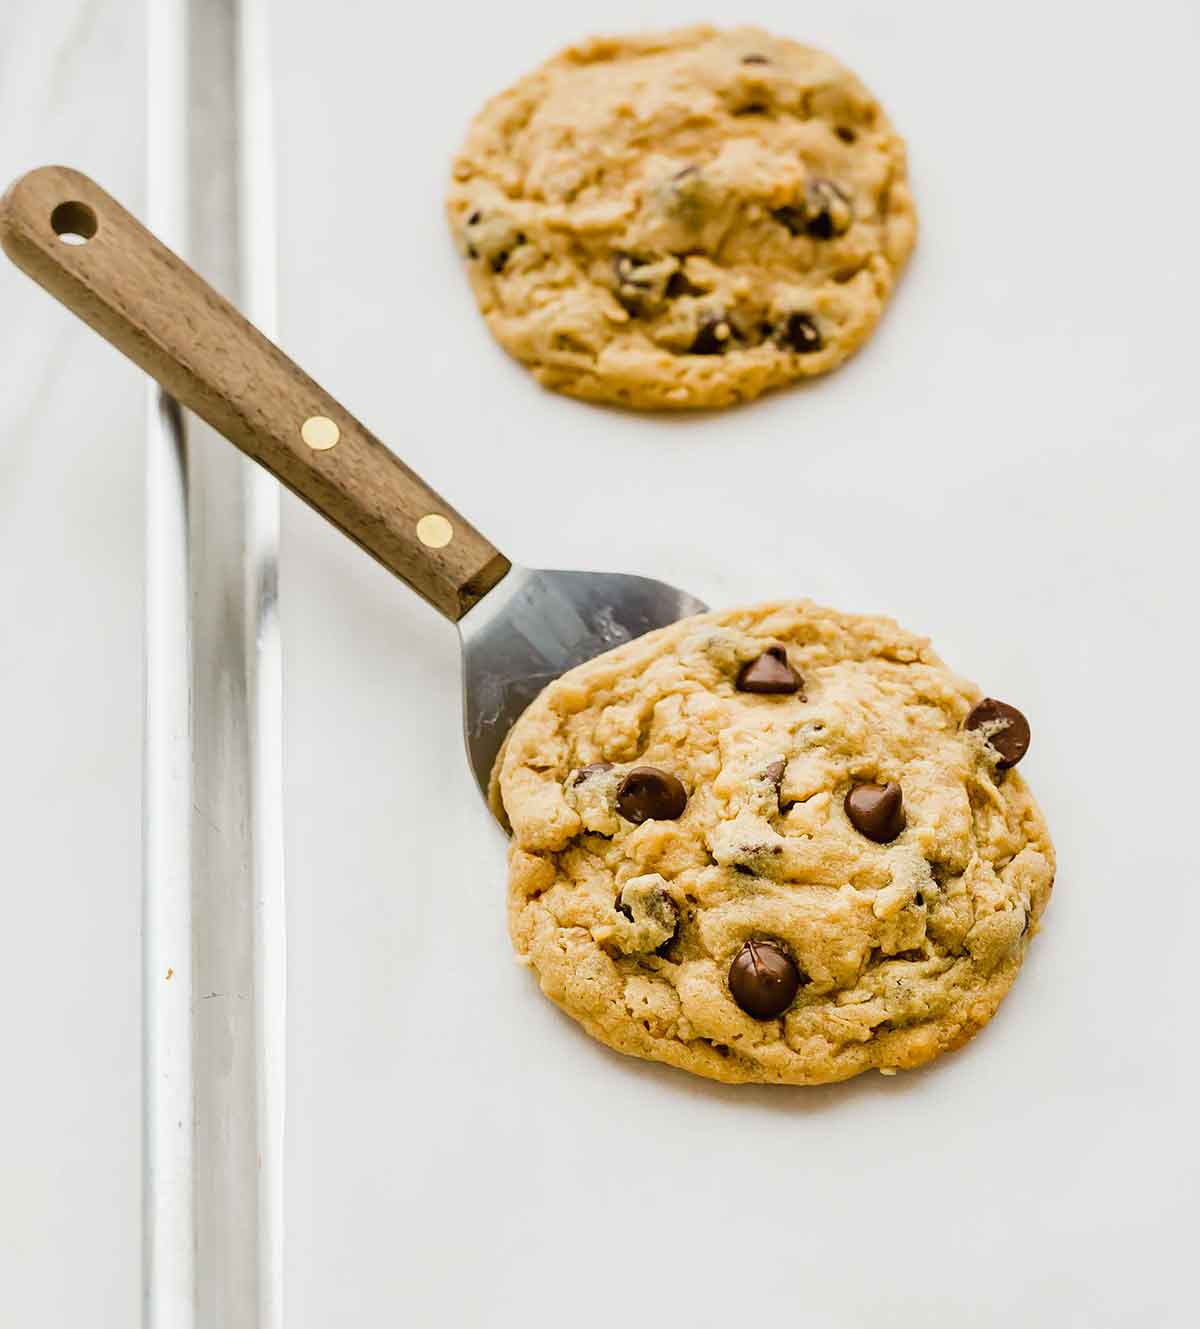 Stainless steel spatula slid underneath of a peanut butter oatmeal chocolate chip cookie on a parchment-lined baking sheet.